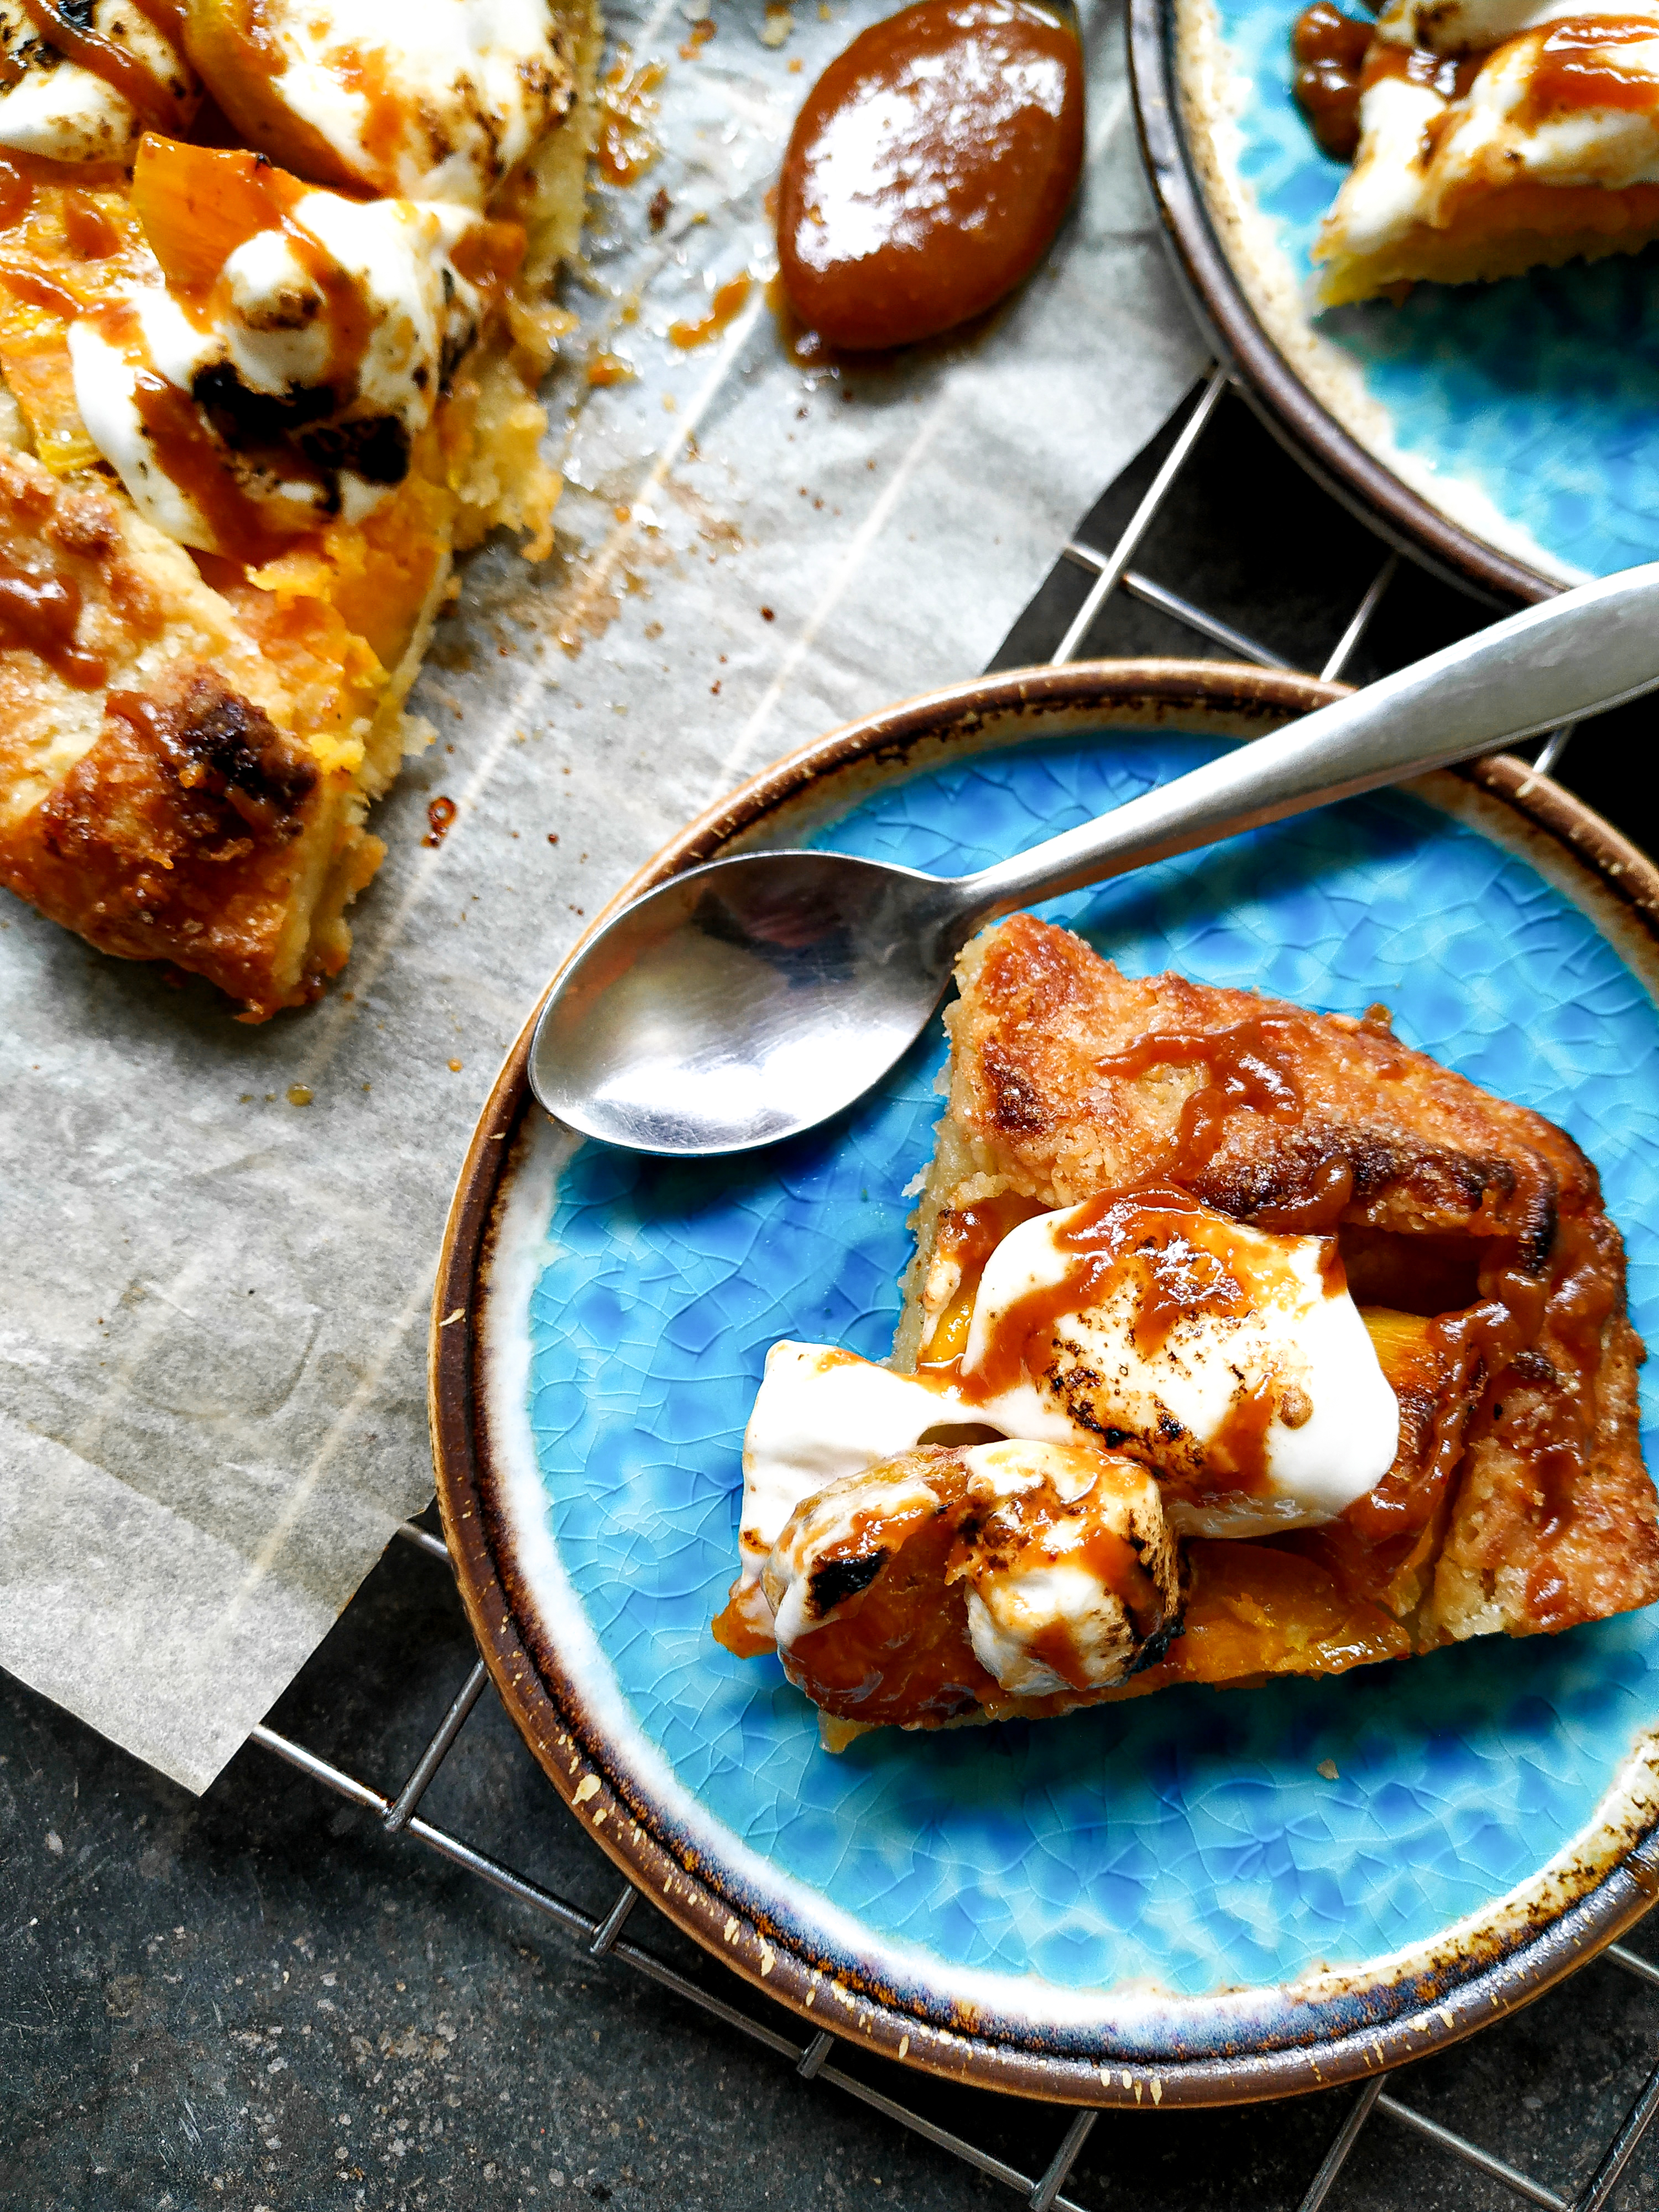 JOBBIE peanut butter praline galette with sweet potato and marshmallows